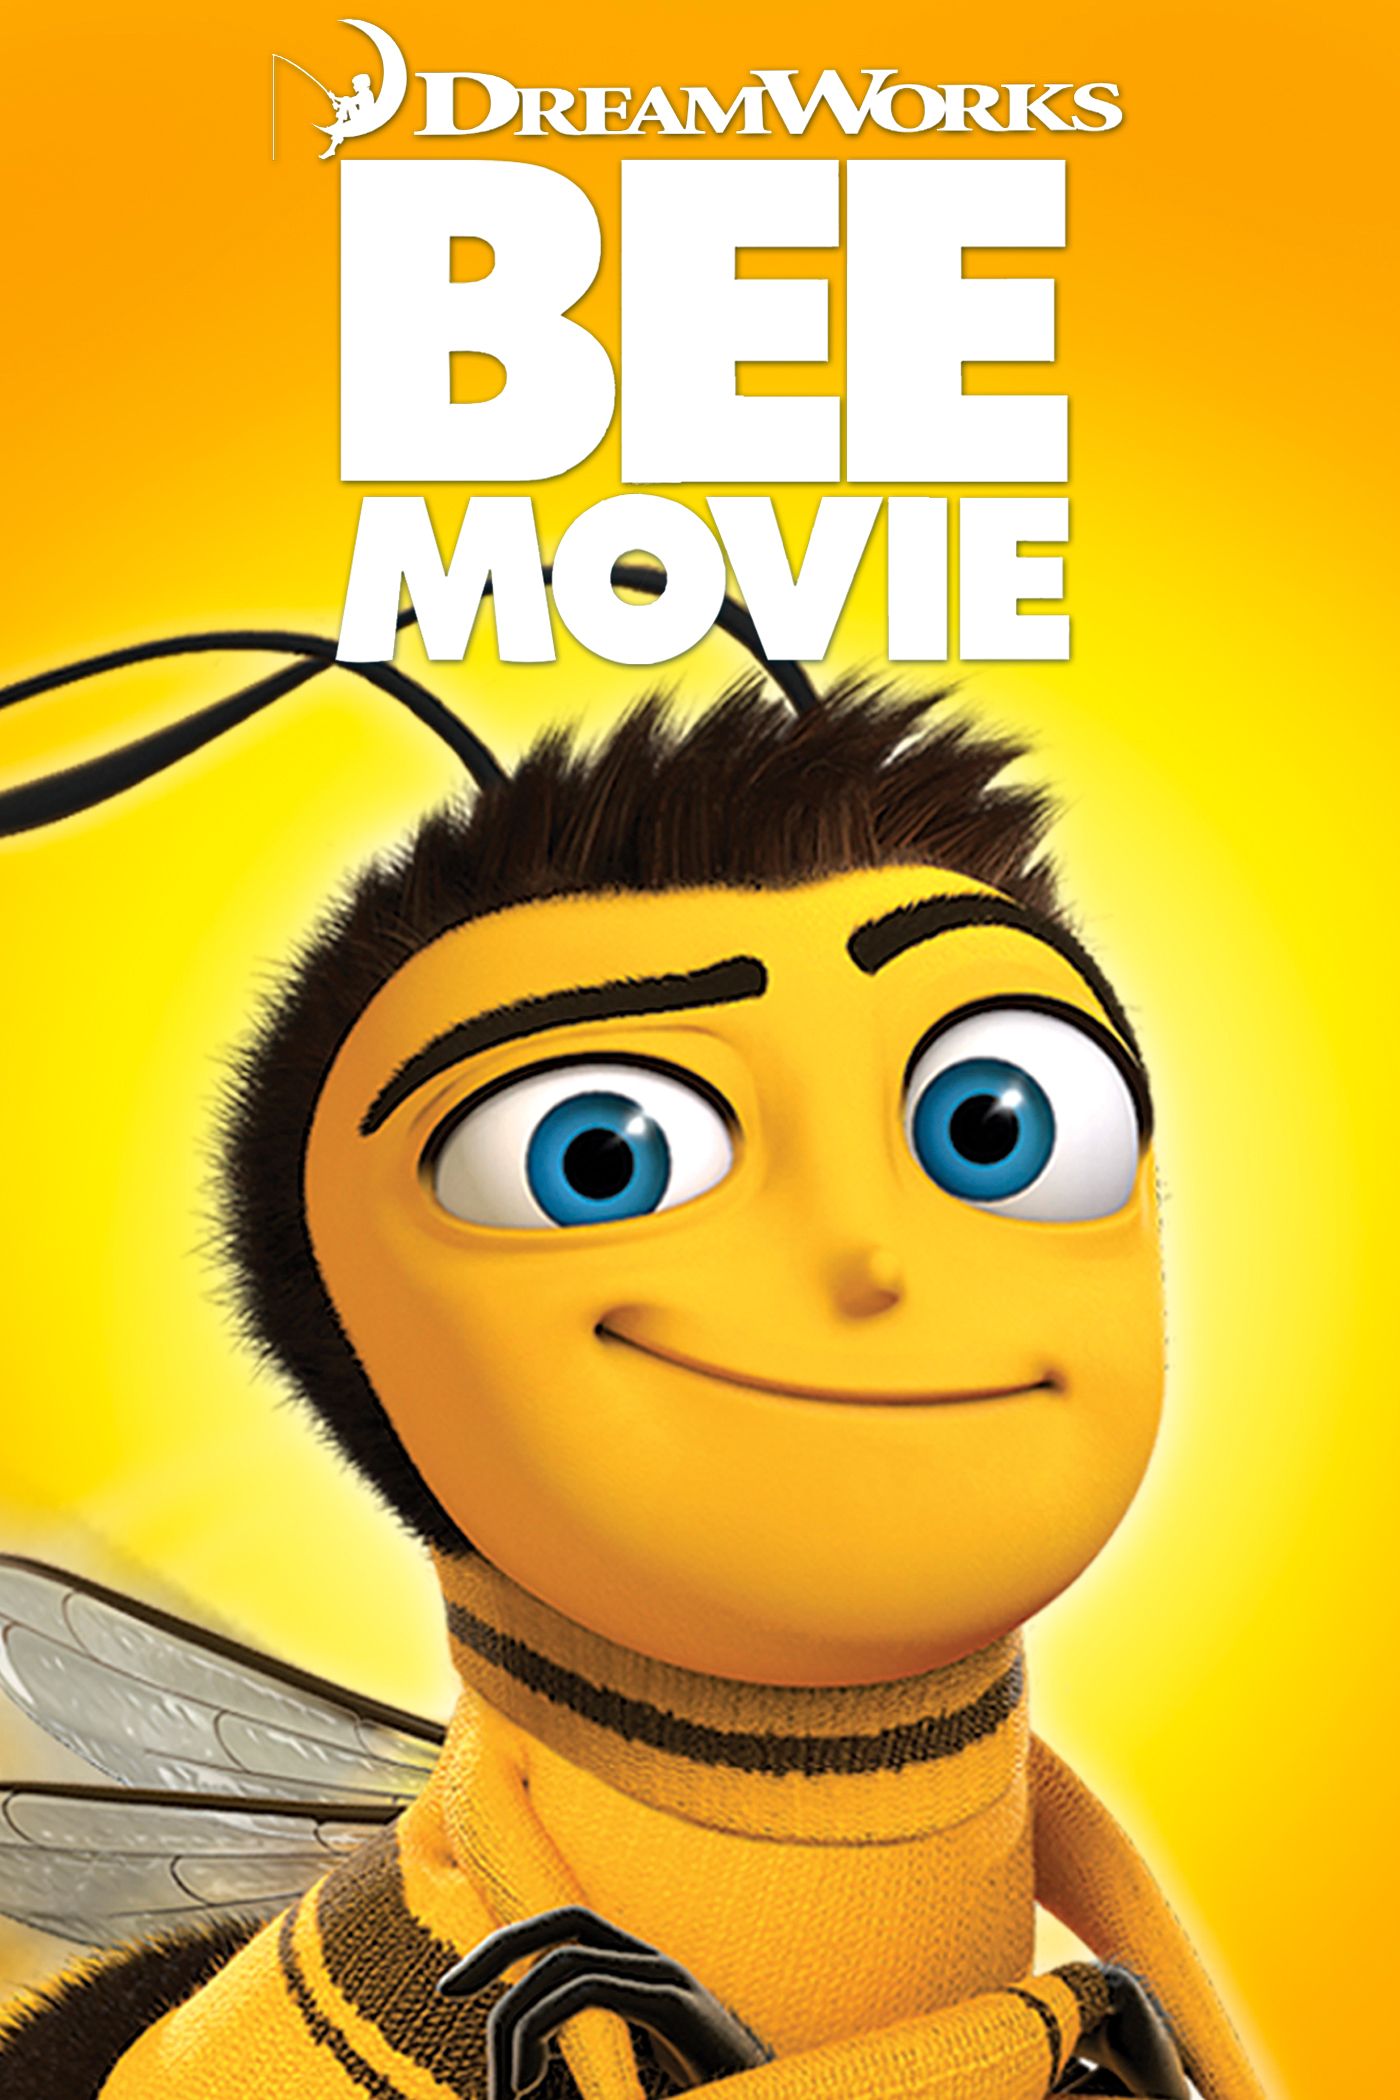 Bee movie full movie free download stardock mycolors themes free download